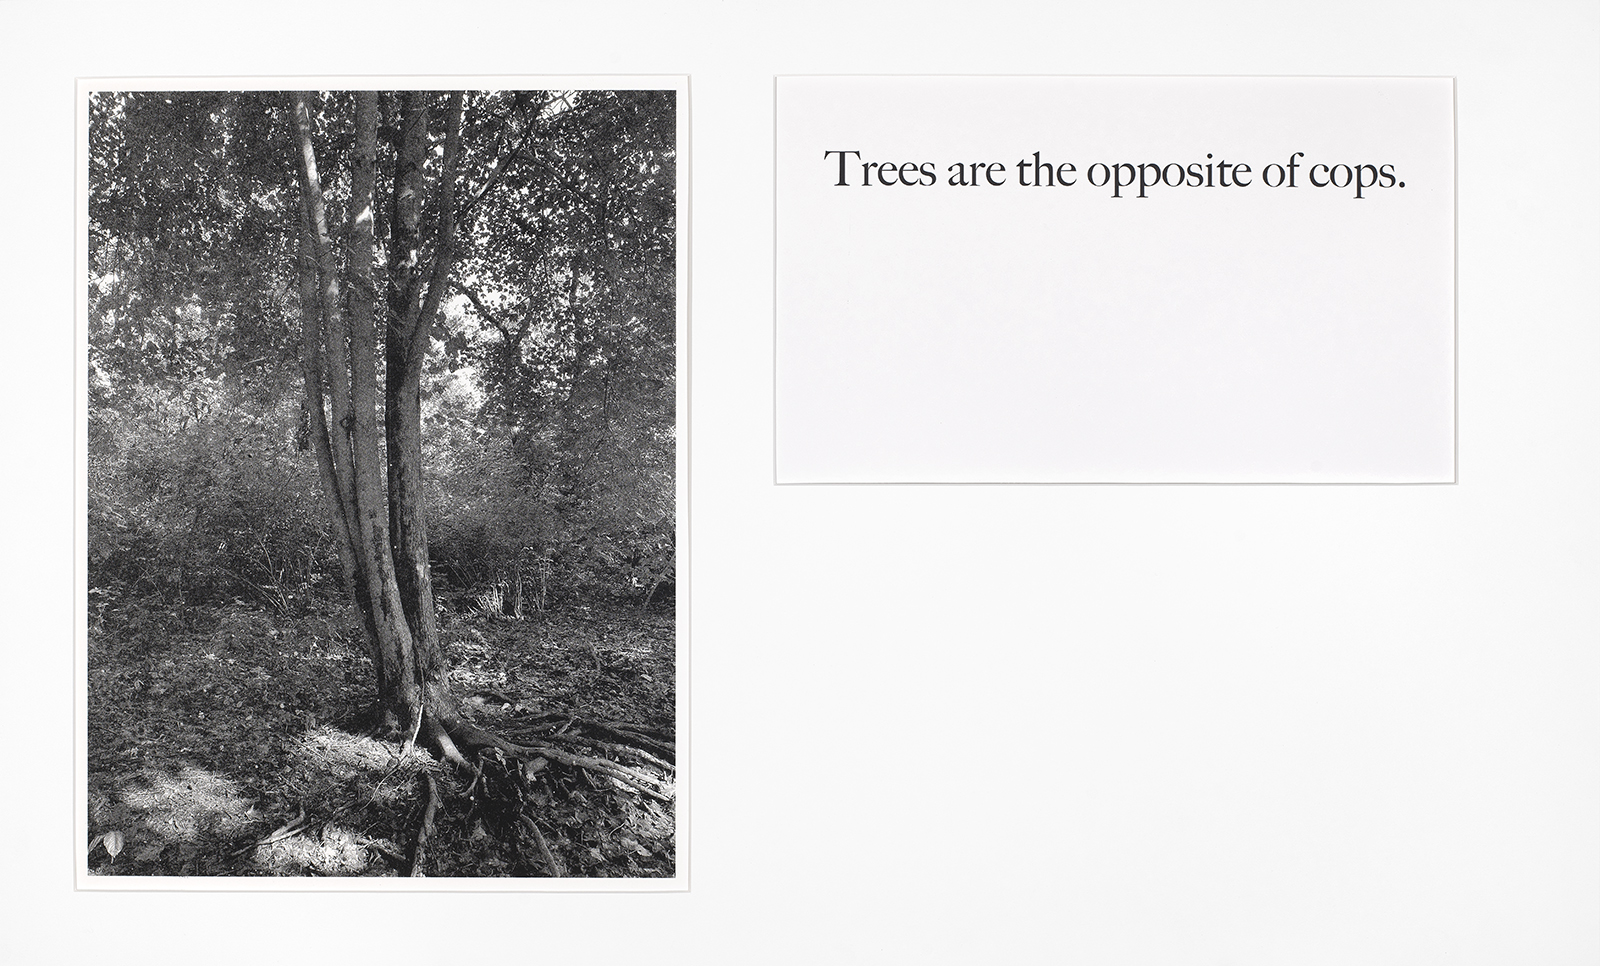 A black and white photograph of a tree with roots exposed, surrounded by bushes.  Text beside the image states: “Trees are the o